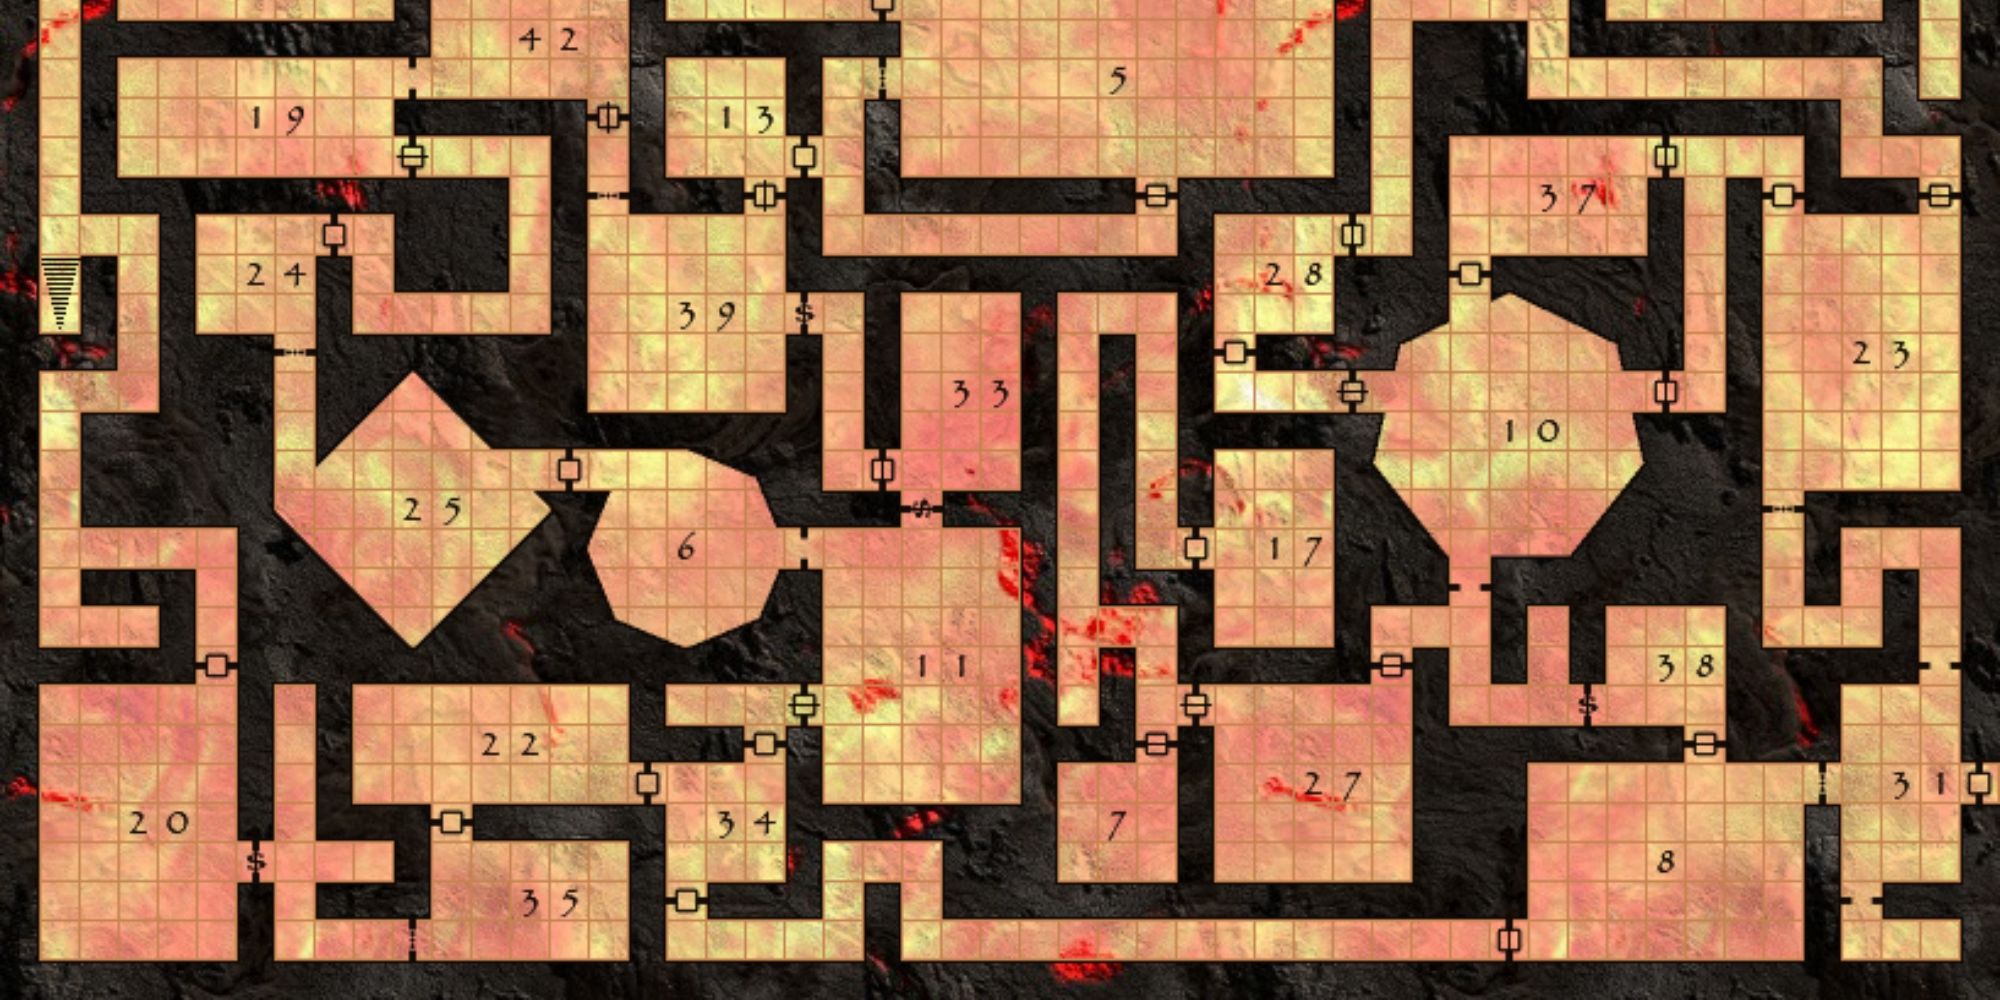 Dungeon map with black walls and orange floors